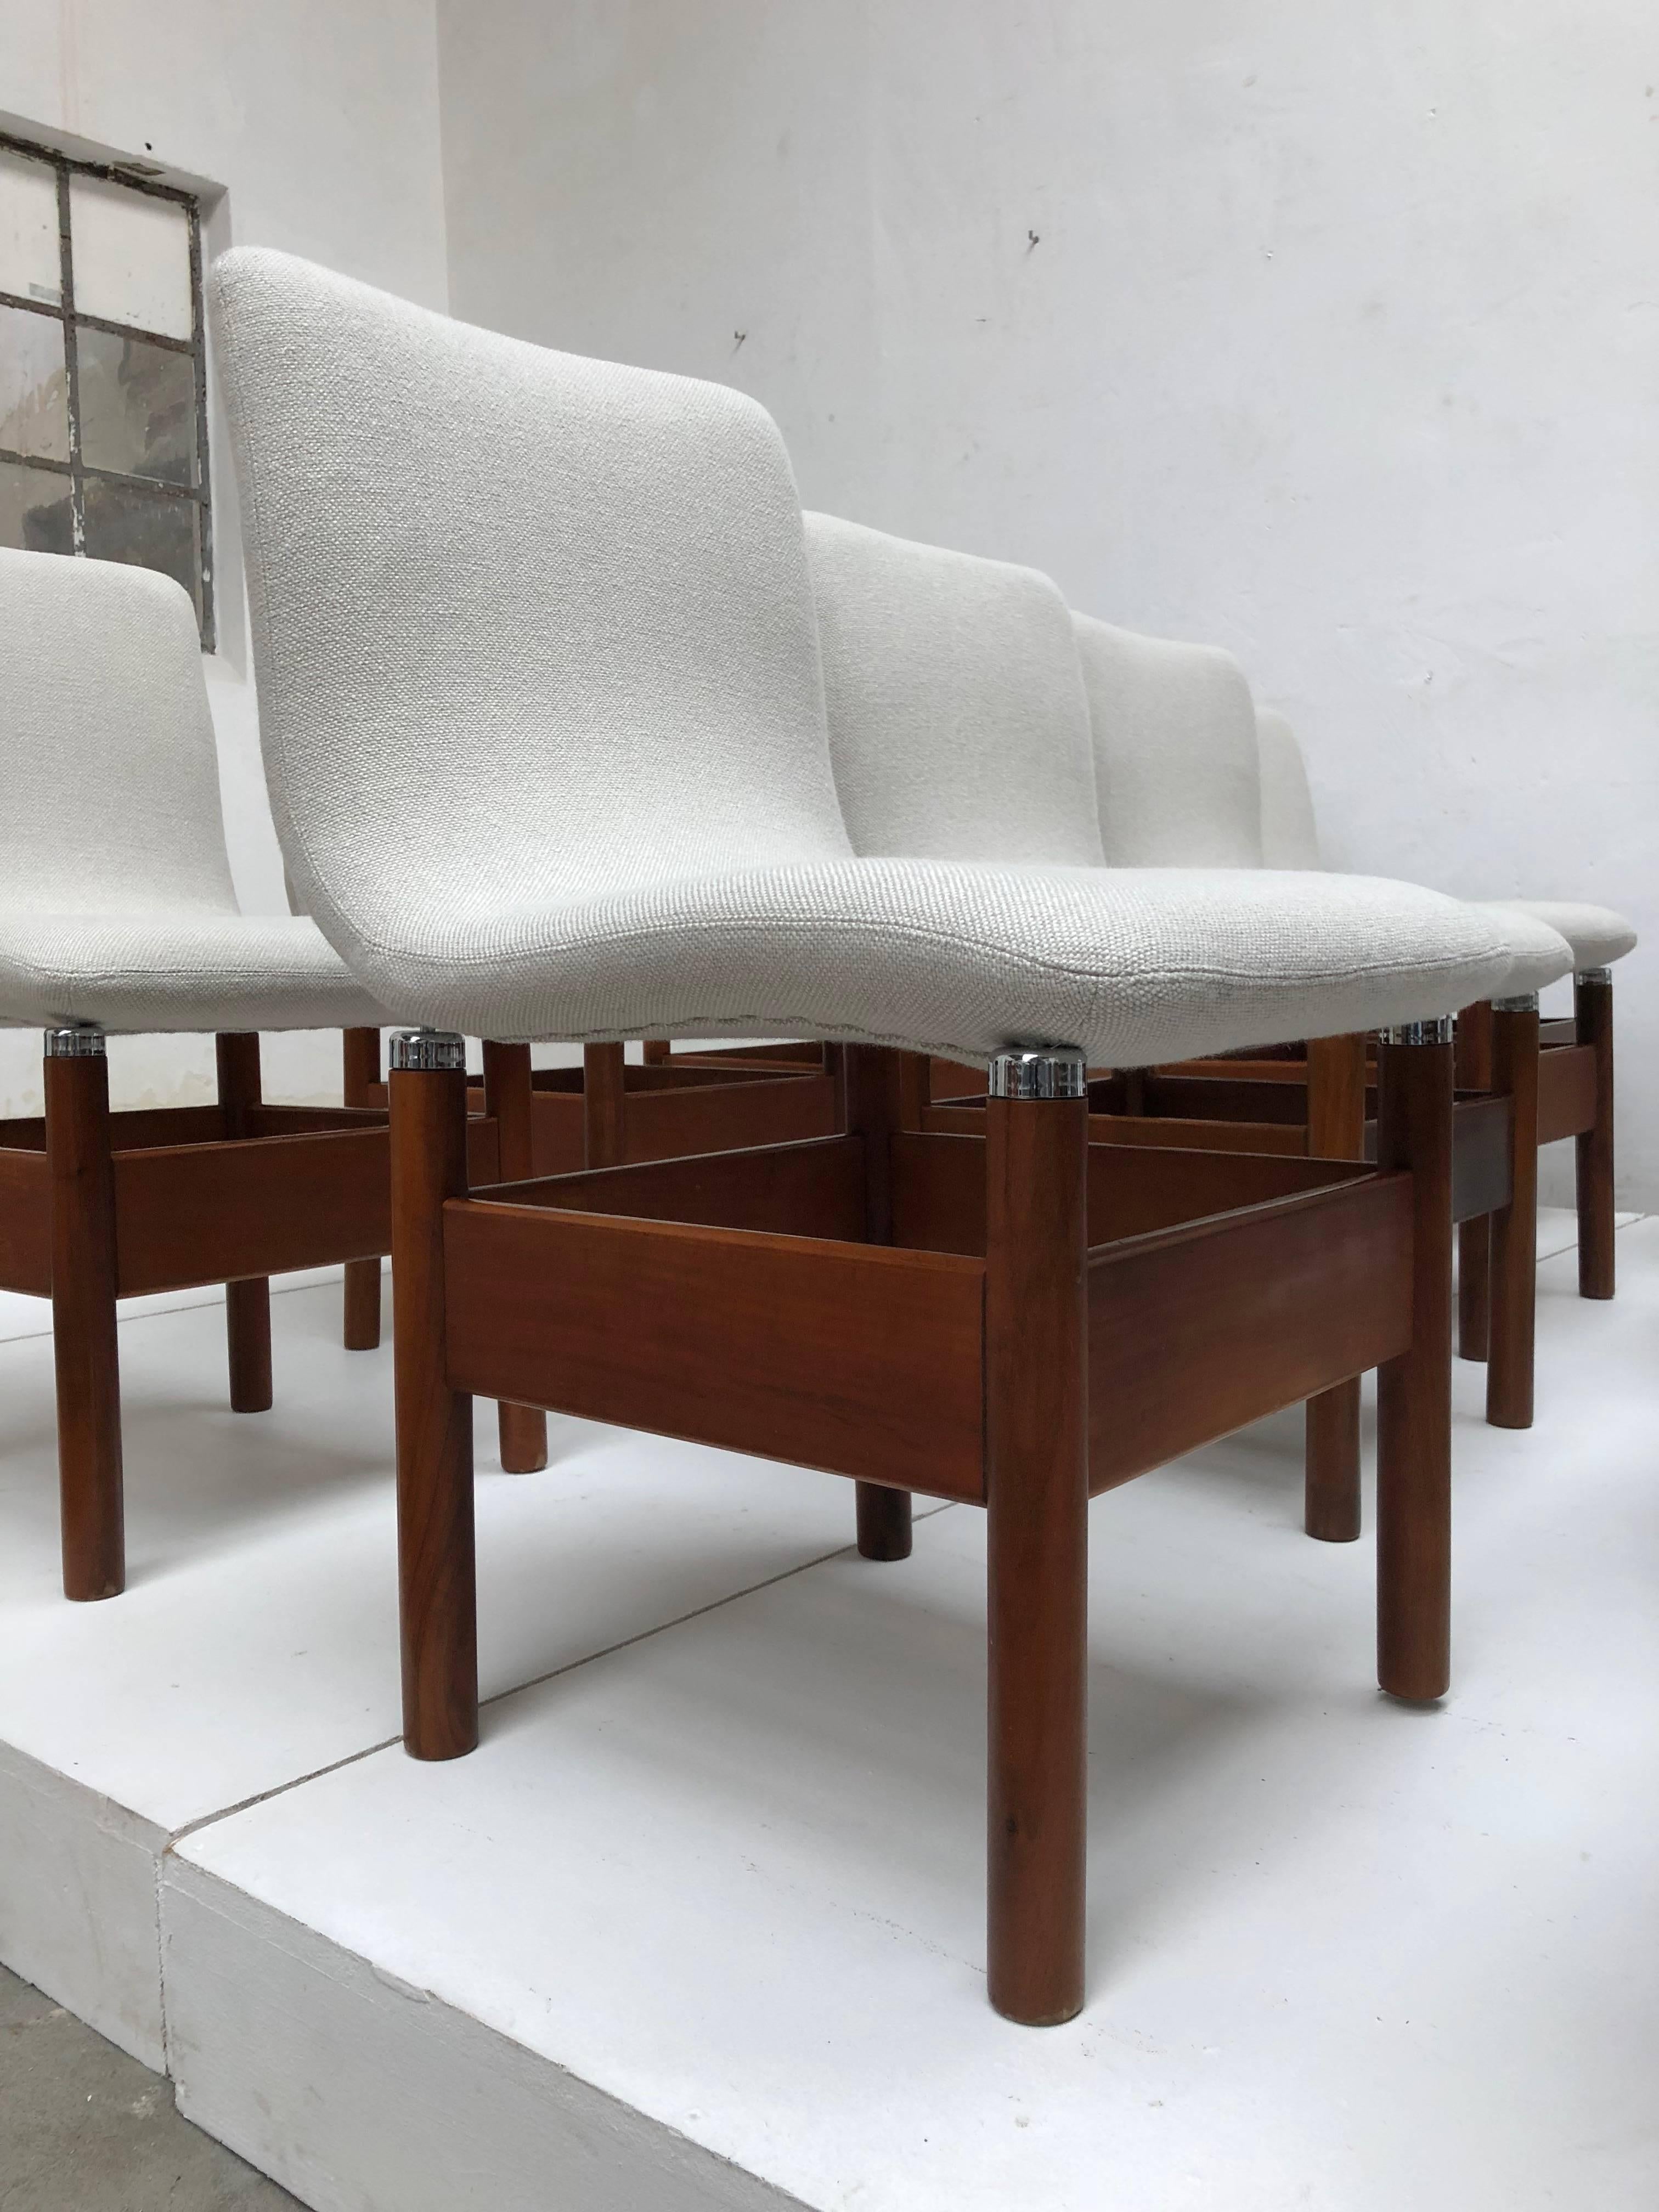 Very rare large set of 12 walnut wood 'Chelsea' dining chairs by Italian designer Vittorio Introini . The upholstery has been fully restored including new Pantera foam throughout and new high quality Danish 'Hallingdal 65' wool fabric designed by